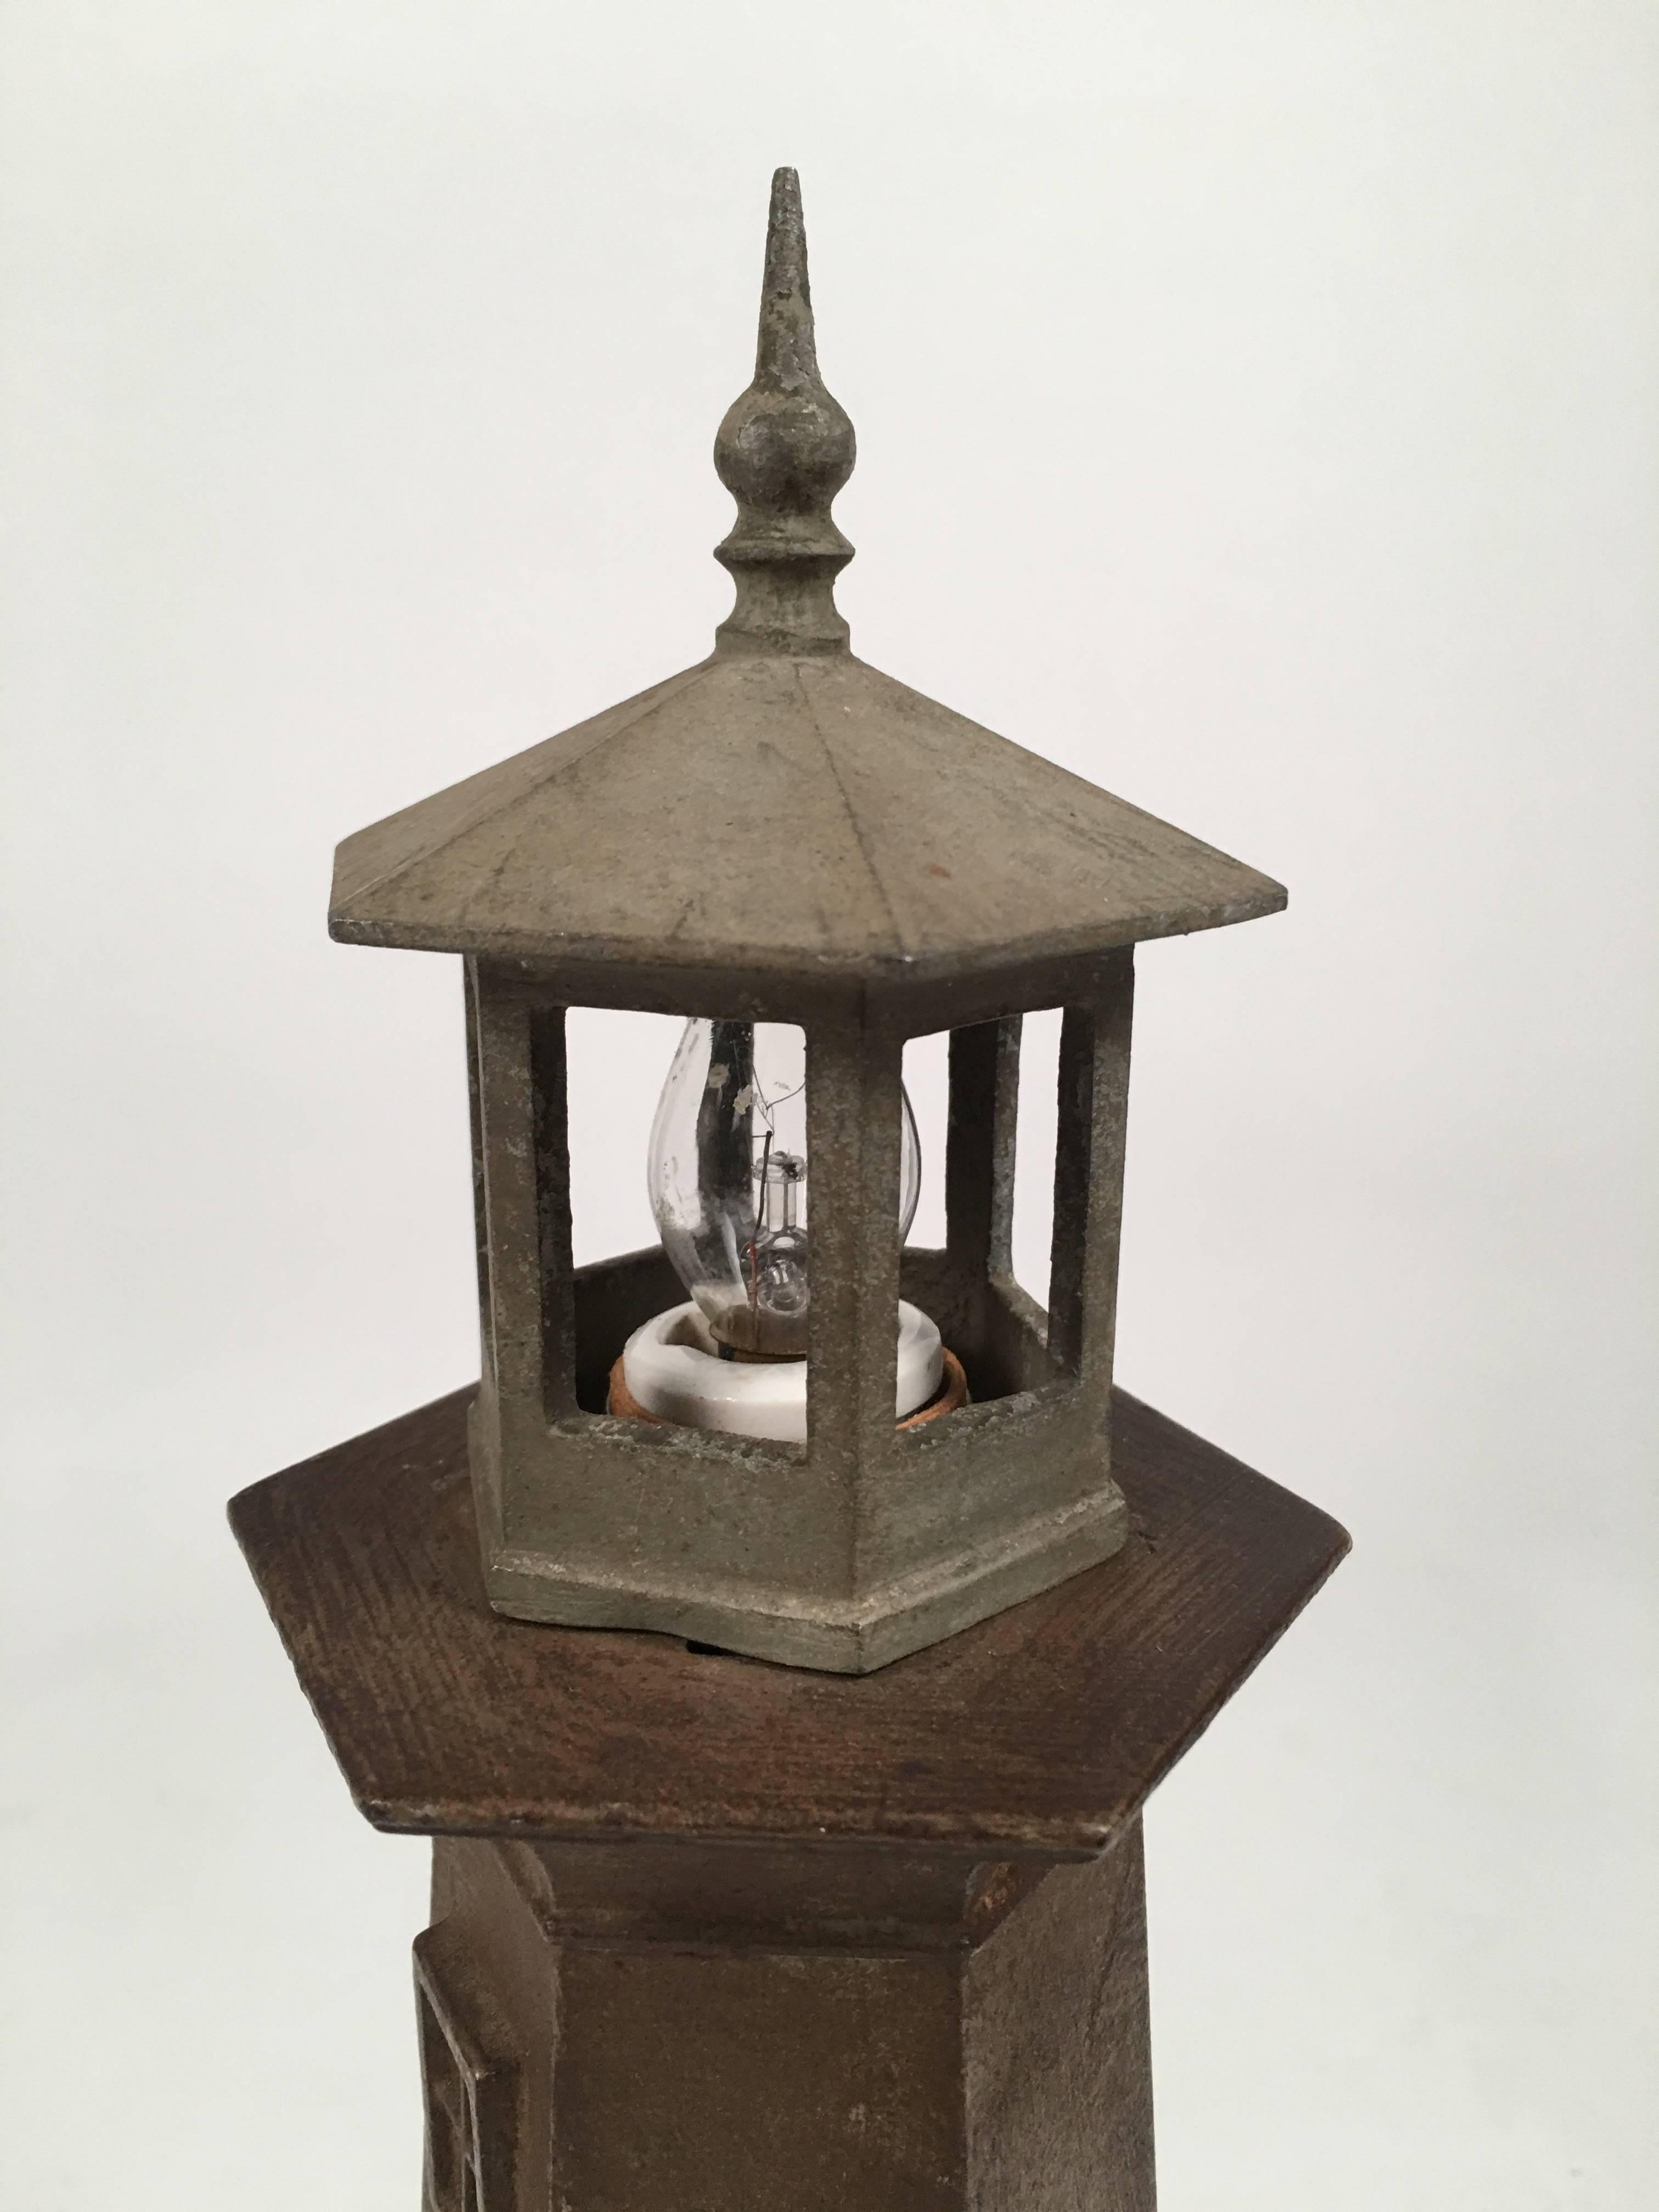 A vintage, well modeled, cast metal lighthouse lamp, the hexagonal lantern with finial on top housing a ceramic socket with a night light bulb, over the hexagonal tower with windows on various levels, with a central door just above the stepped, wood